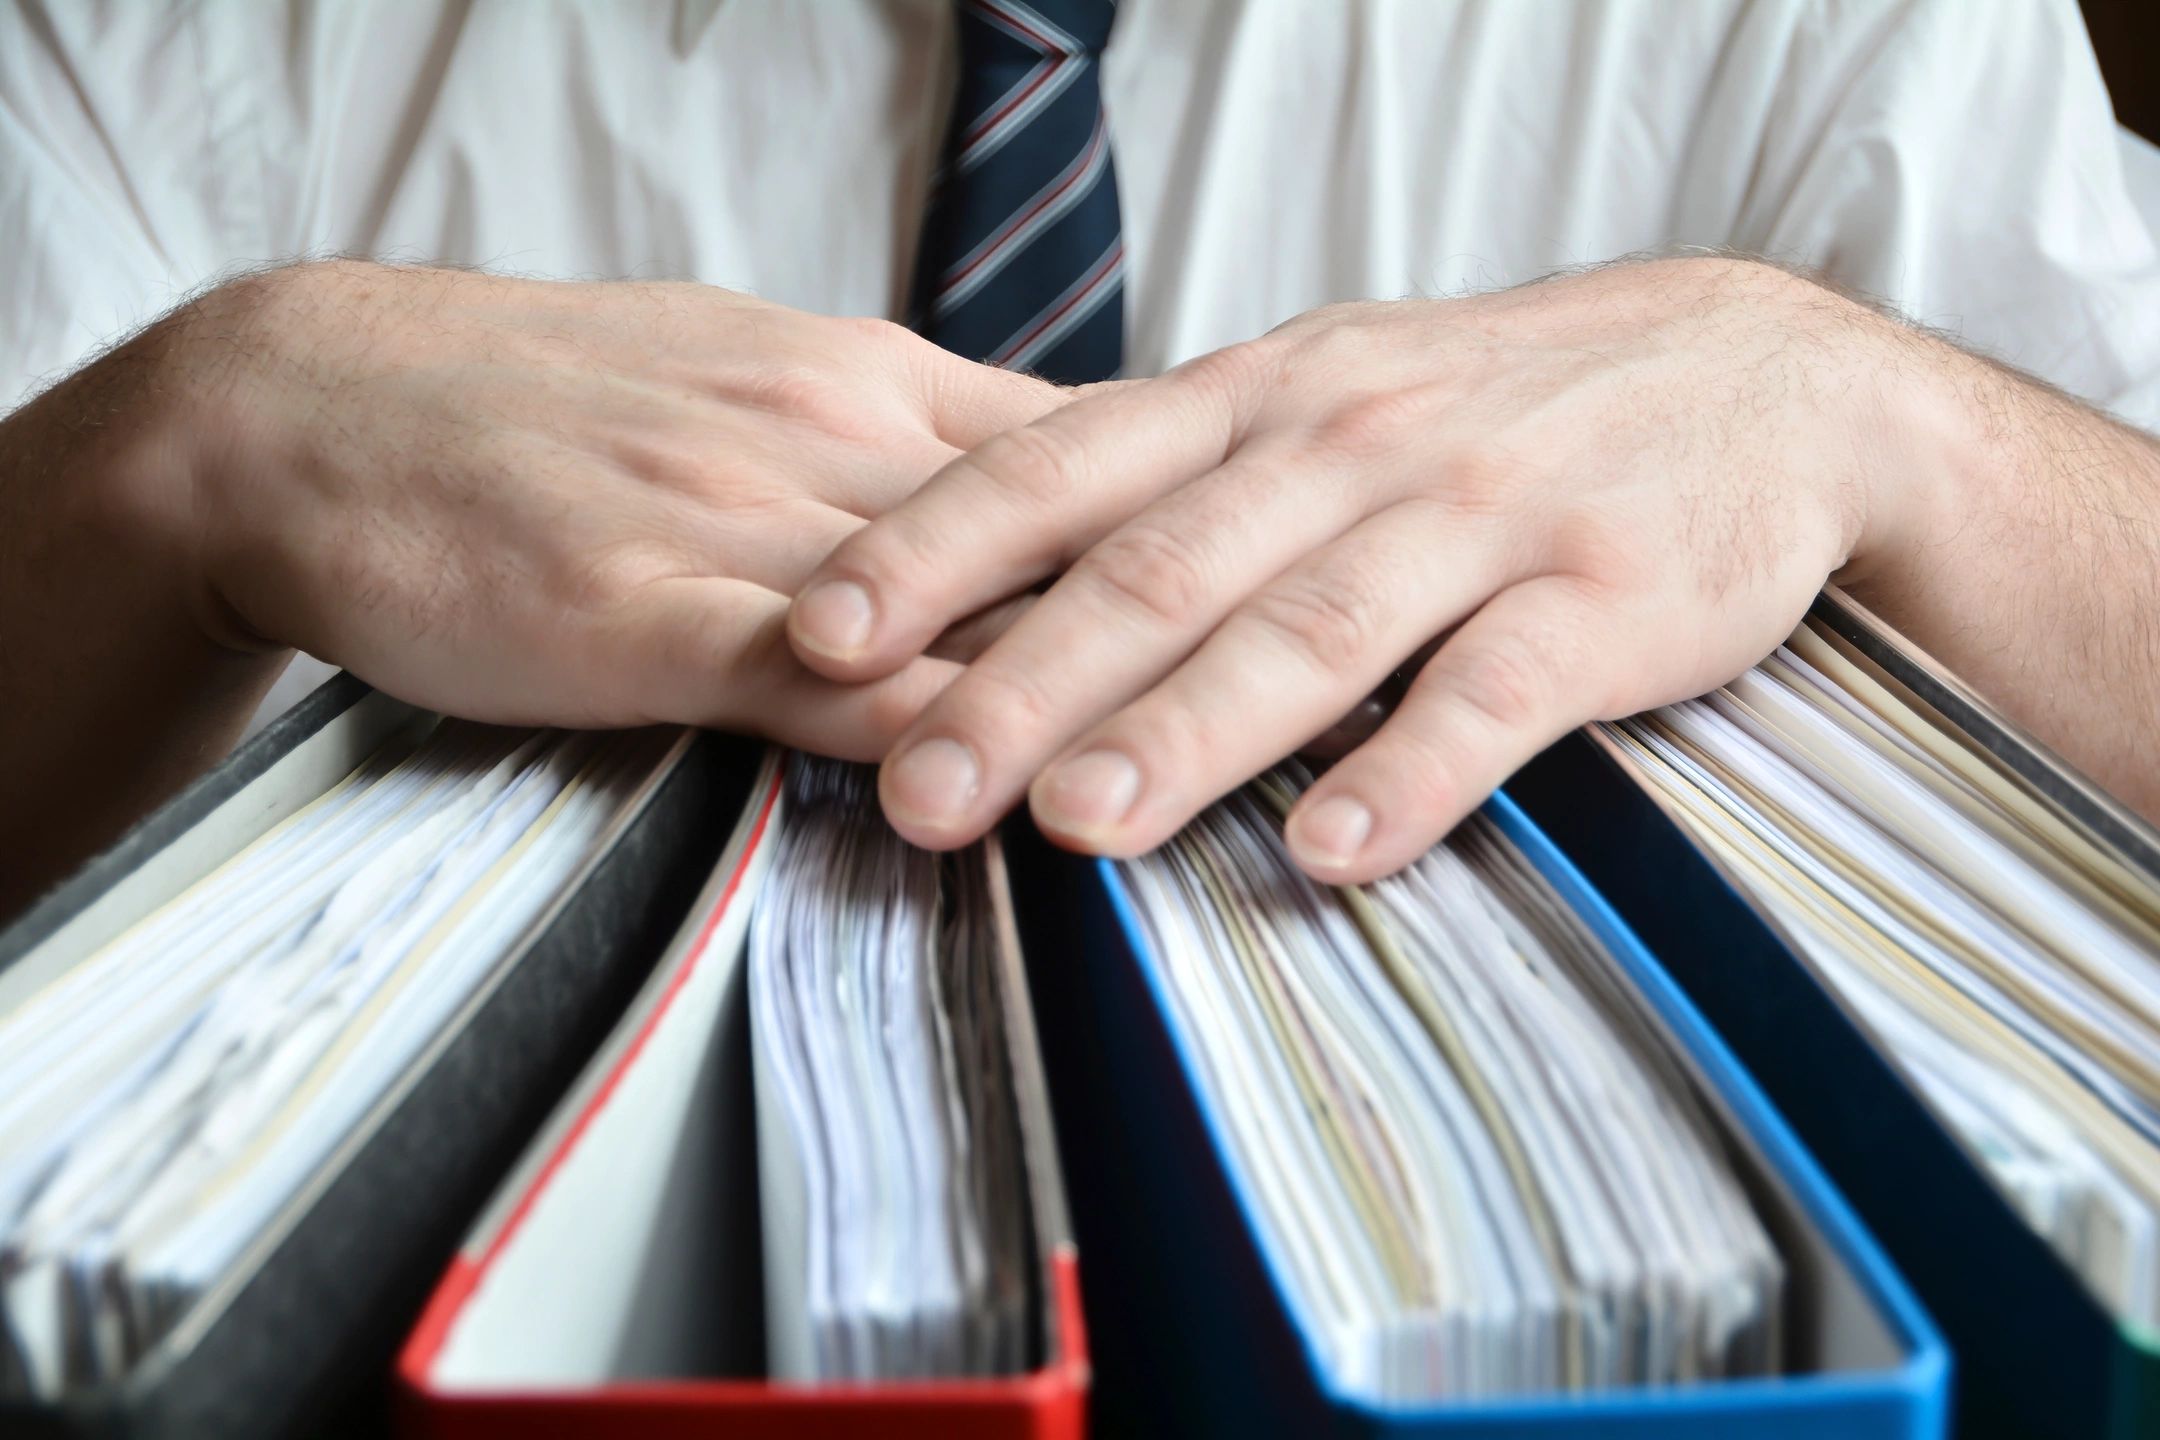 Man's hands on top of four binders with papers